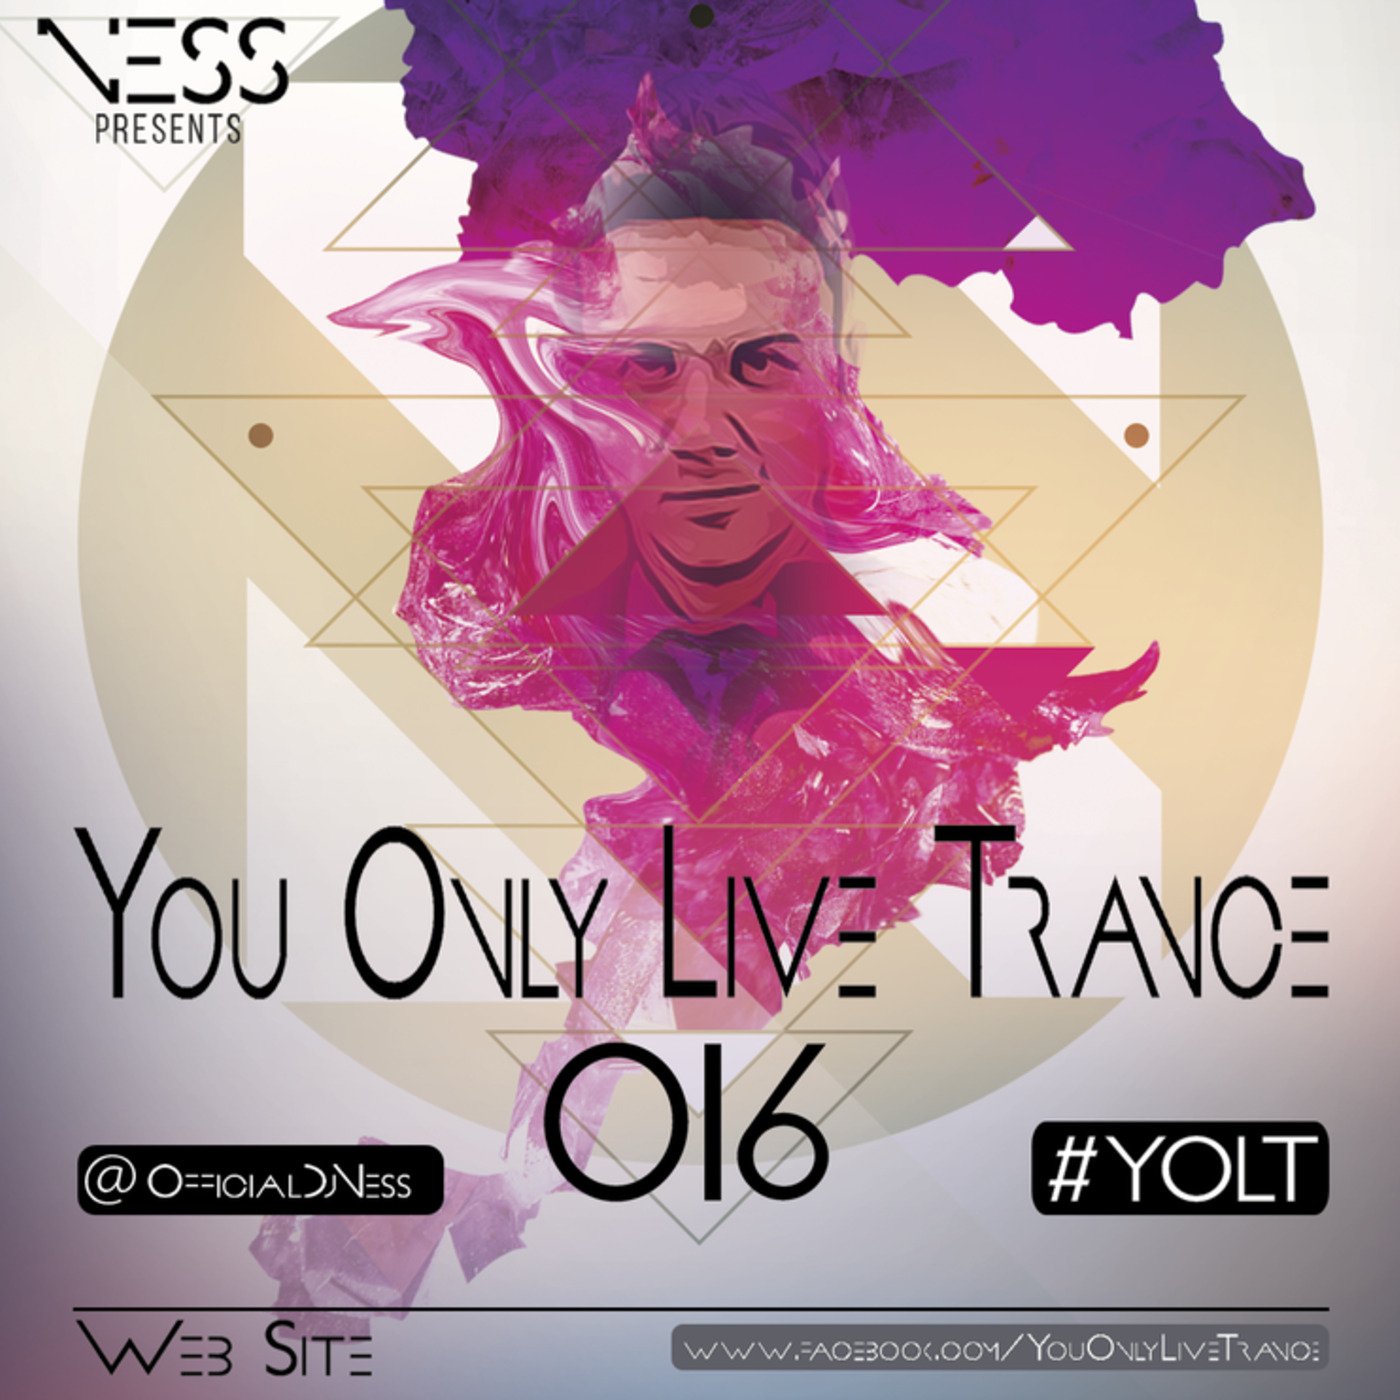 You Only Live Trance 016